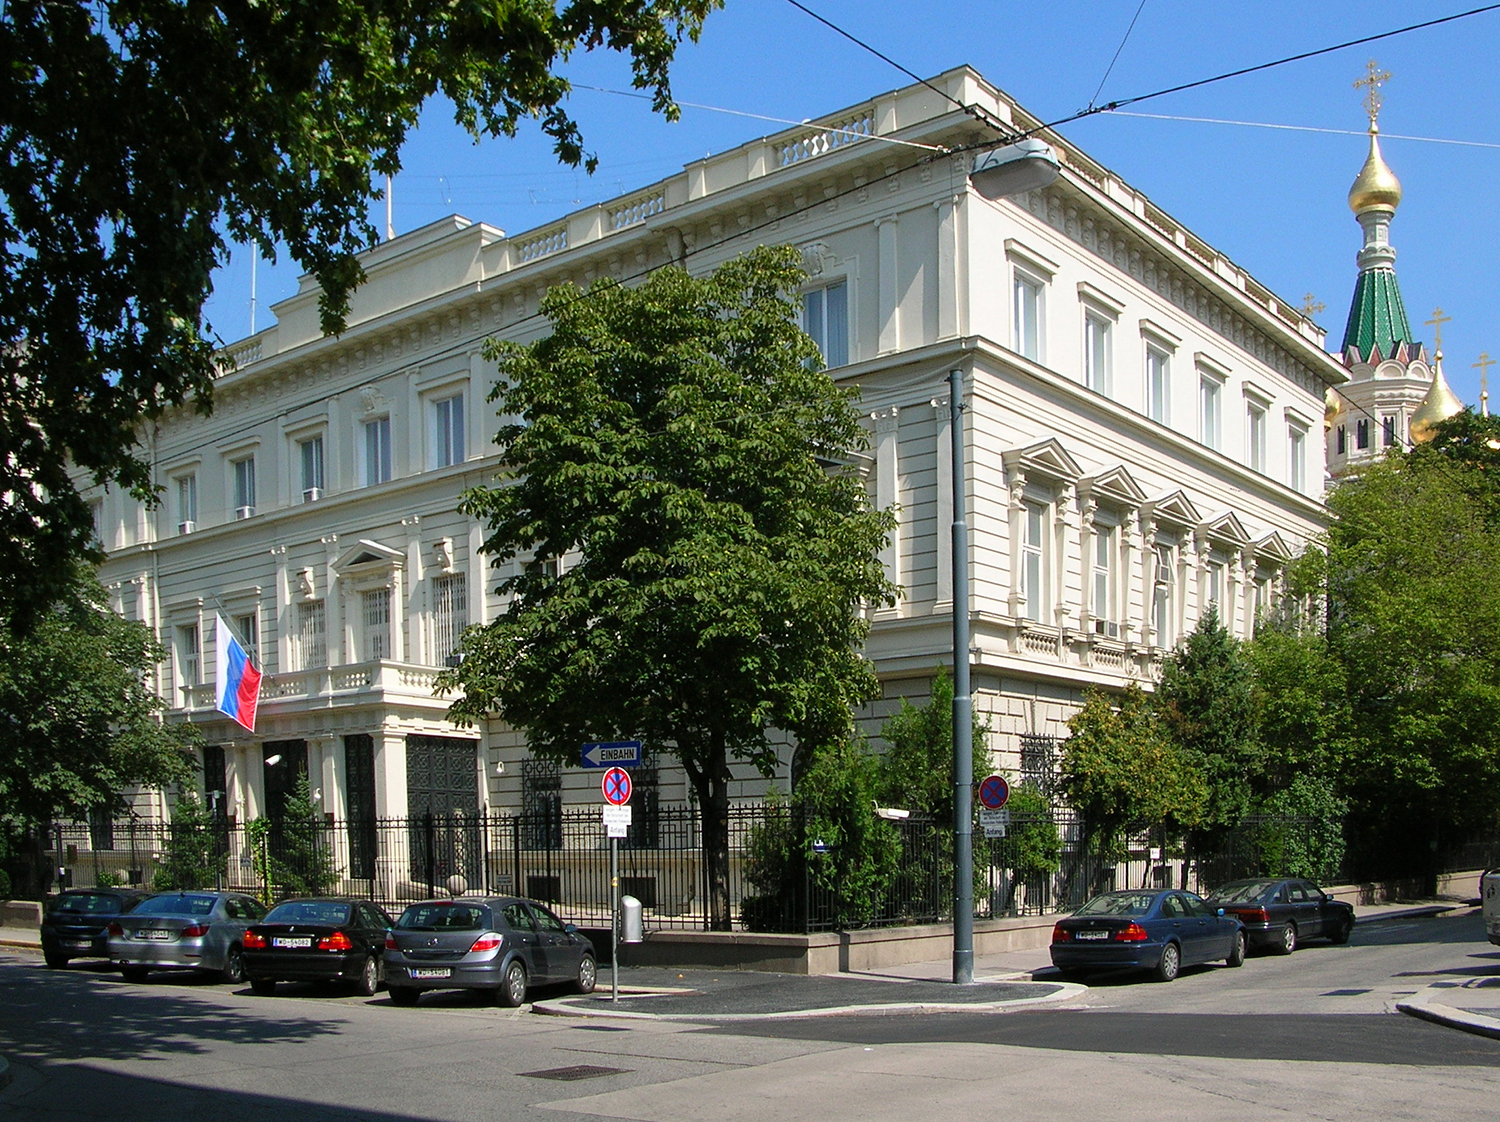 We explain why Vienna has been a paradise for Russian spies for years